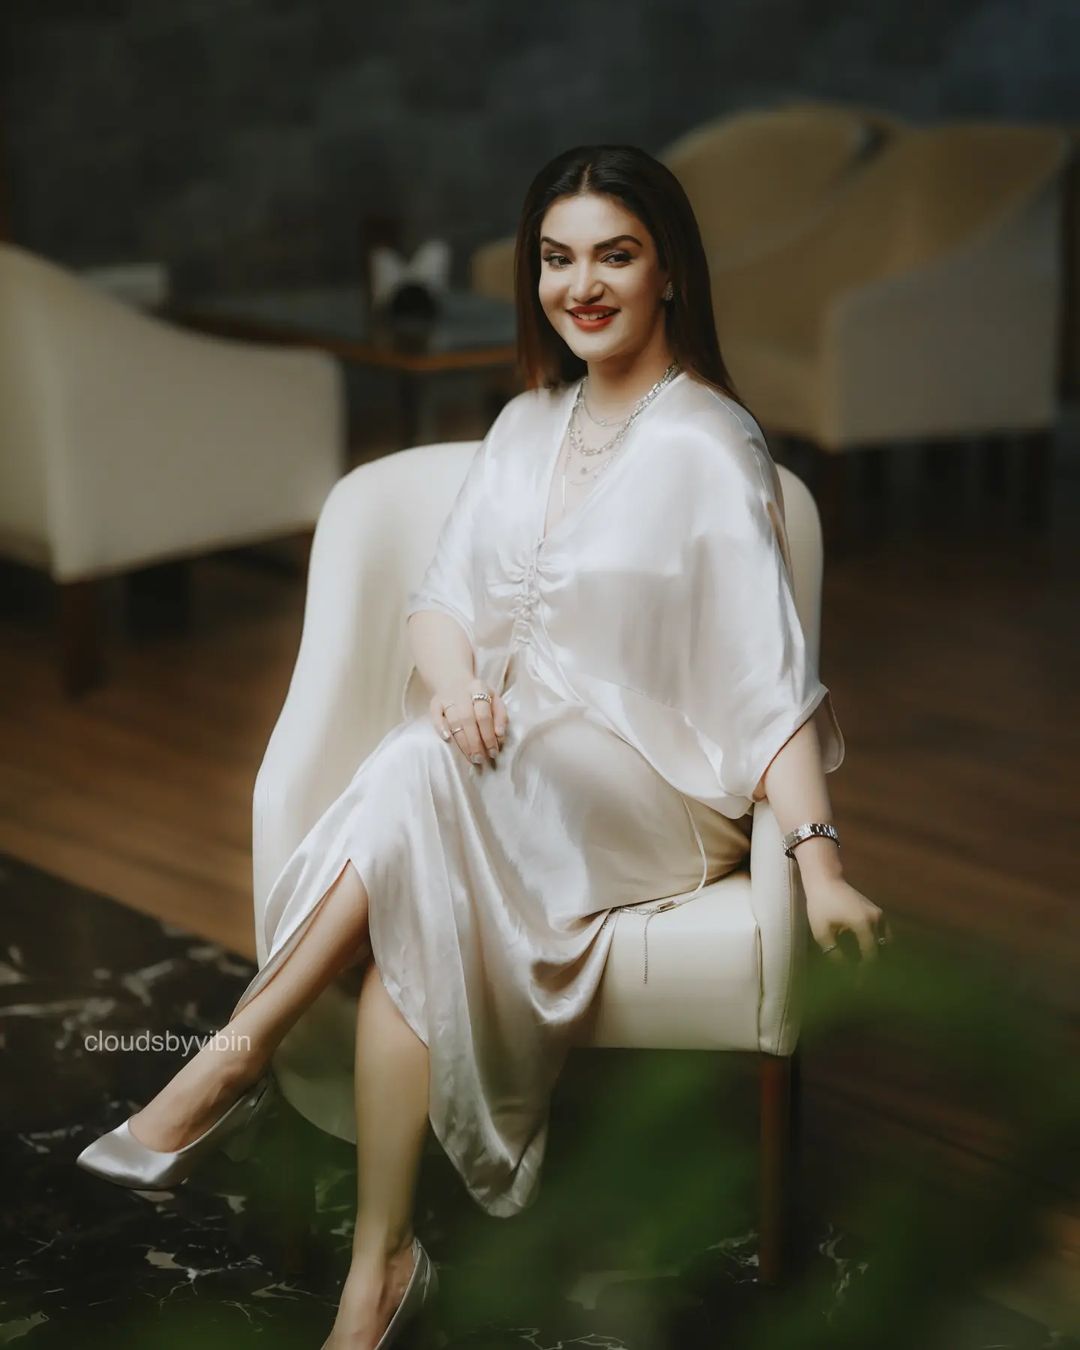 Actress honey rose looks bold and awesome in this pictures-Actresshoney, Honey Rose Photos,Spicy Hot Pics,Images,High Resolution WallPapers Download